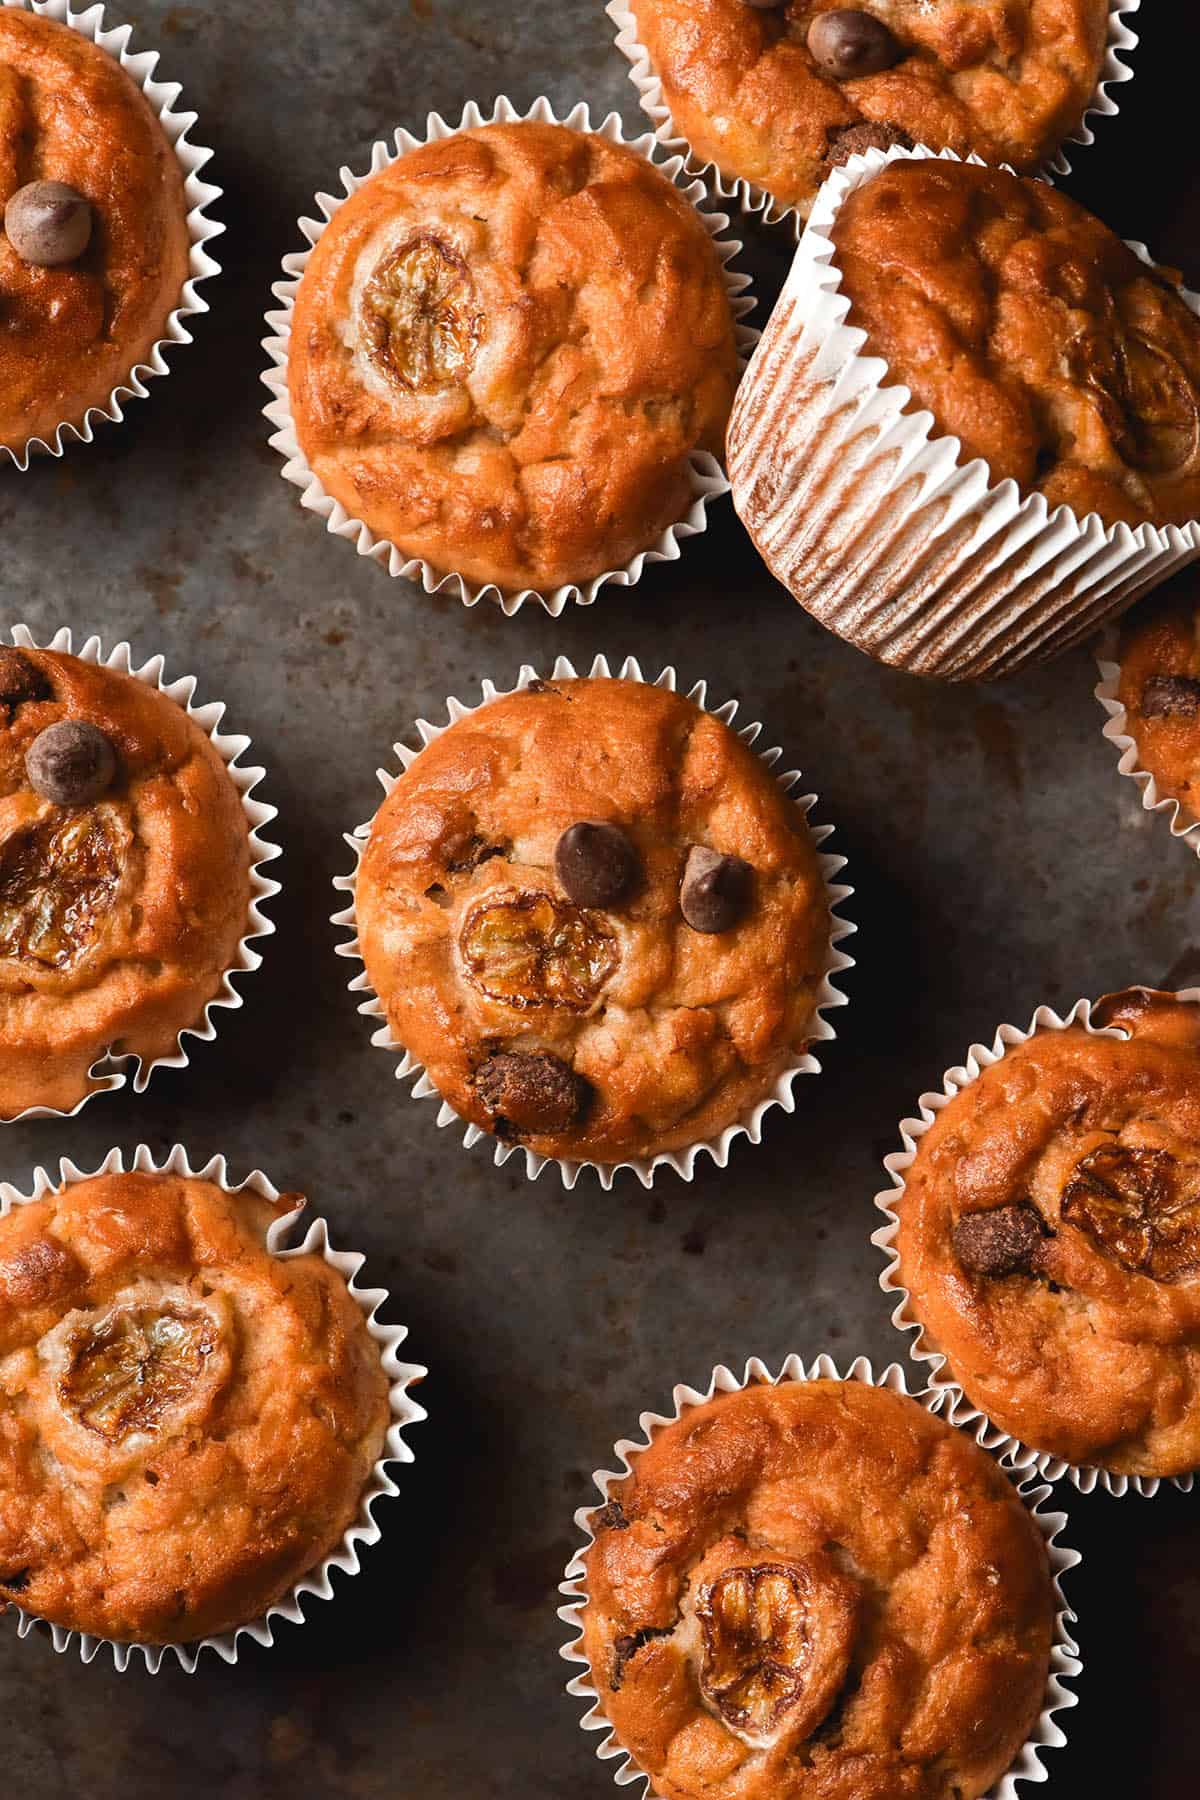 An aerial image of gluten free banana choc chip muffins in white muffin liners casually arranged on a dark metal backdrop.